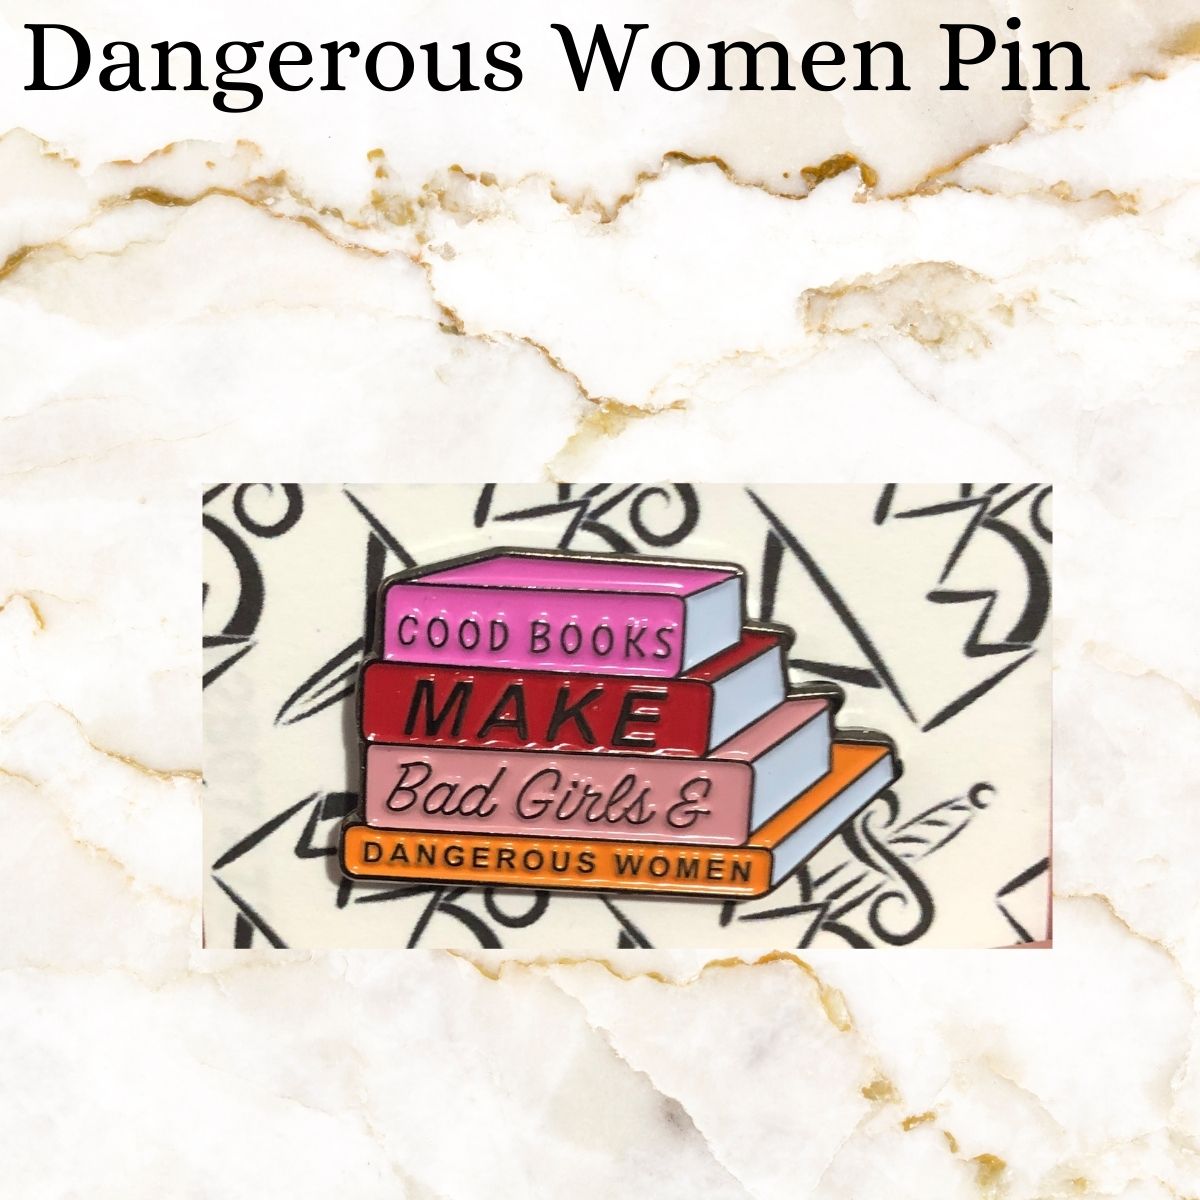 Book pin - stack of 4 books coloured pink red and orange - says Good Books make bad girls and dangerous women